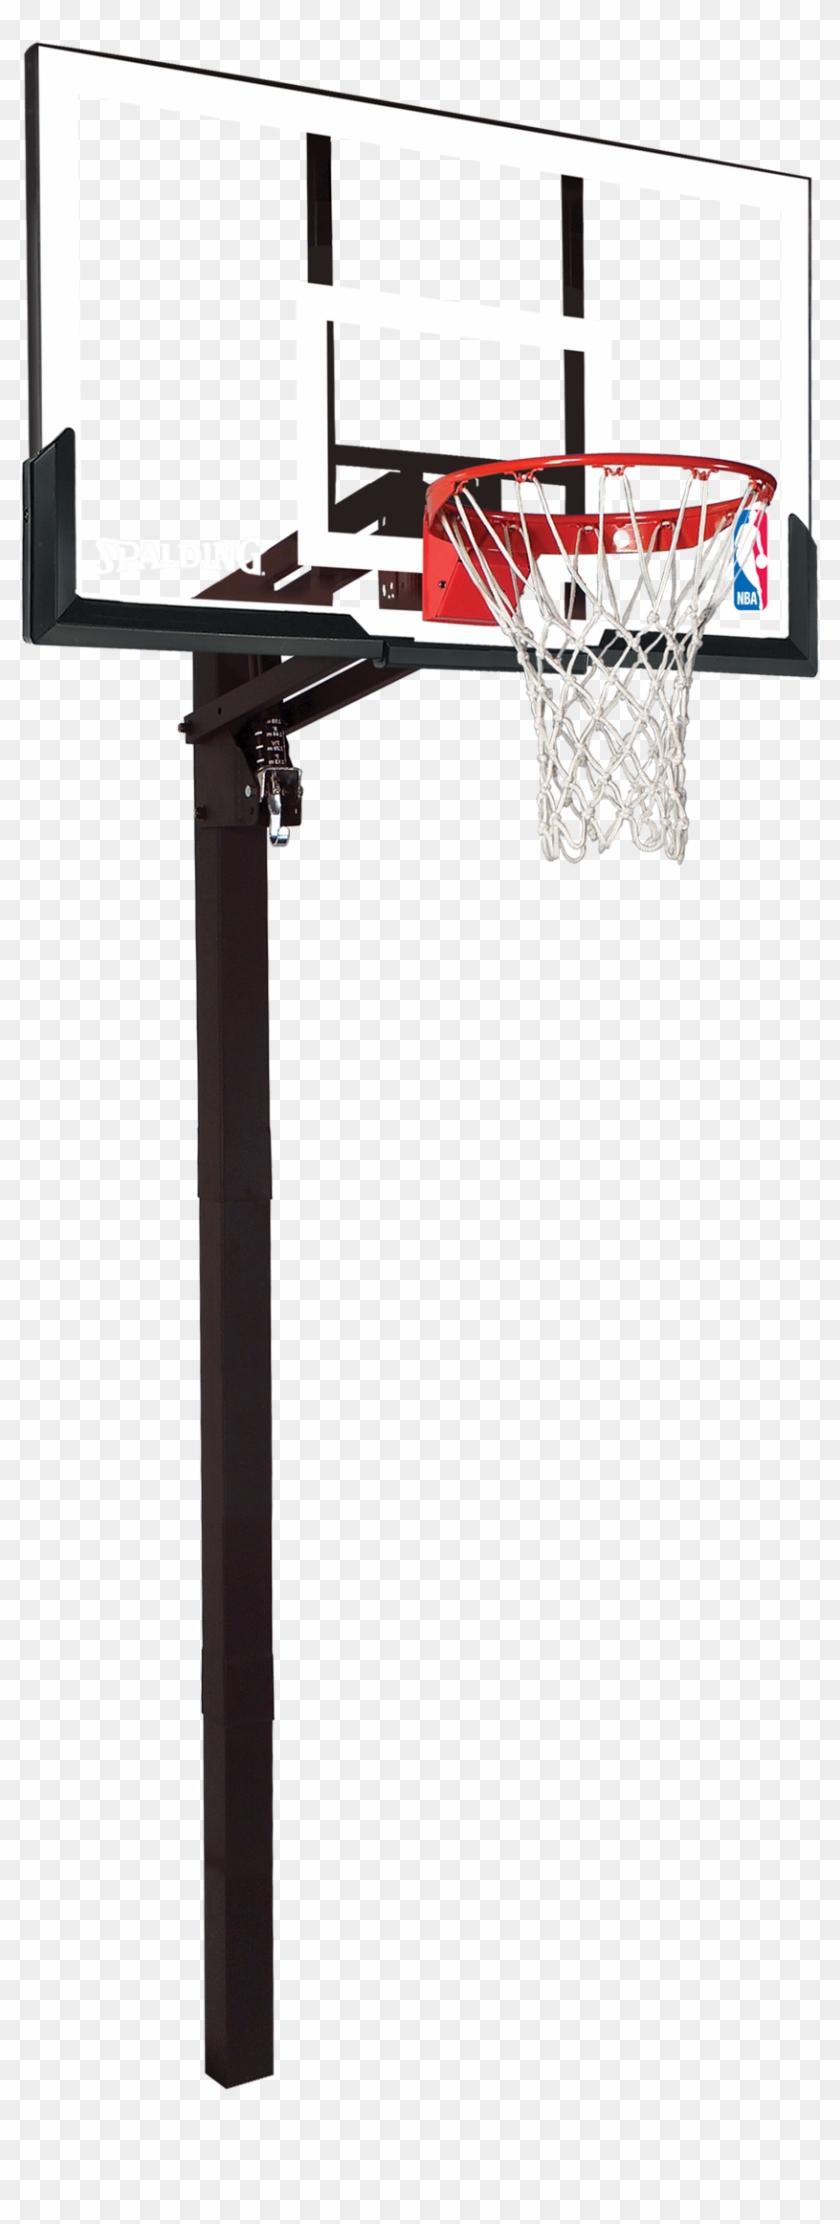 Basketball Goal Png Transparent Png 2232x2768 Pngfind